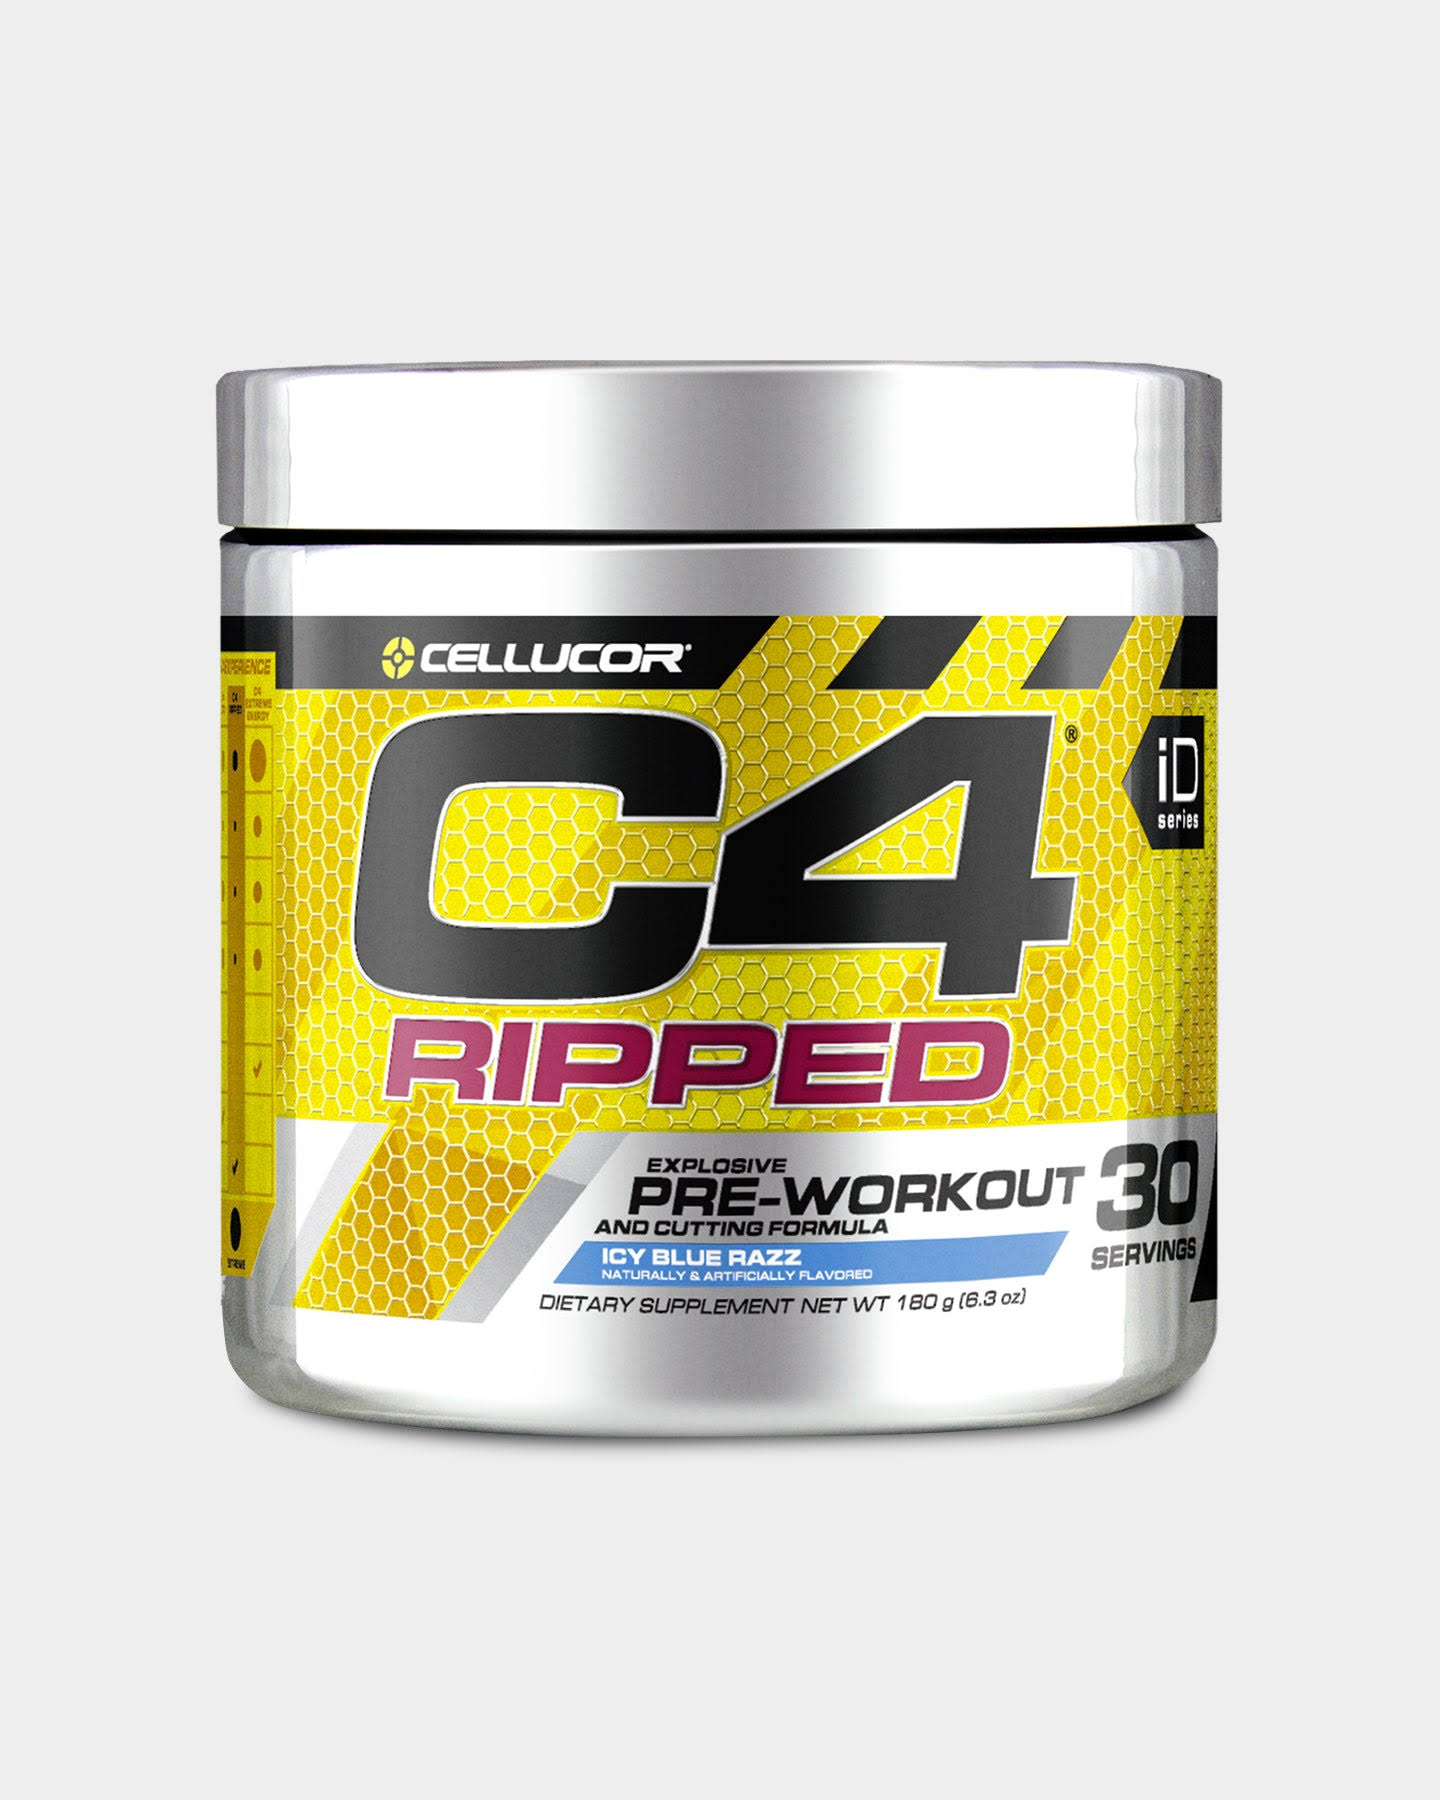 Cellucor C4 Pre Workout Explosive Energy Fat Burner Supplement - Ripped Icy Blue Razz, 30 Servings